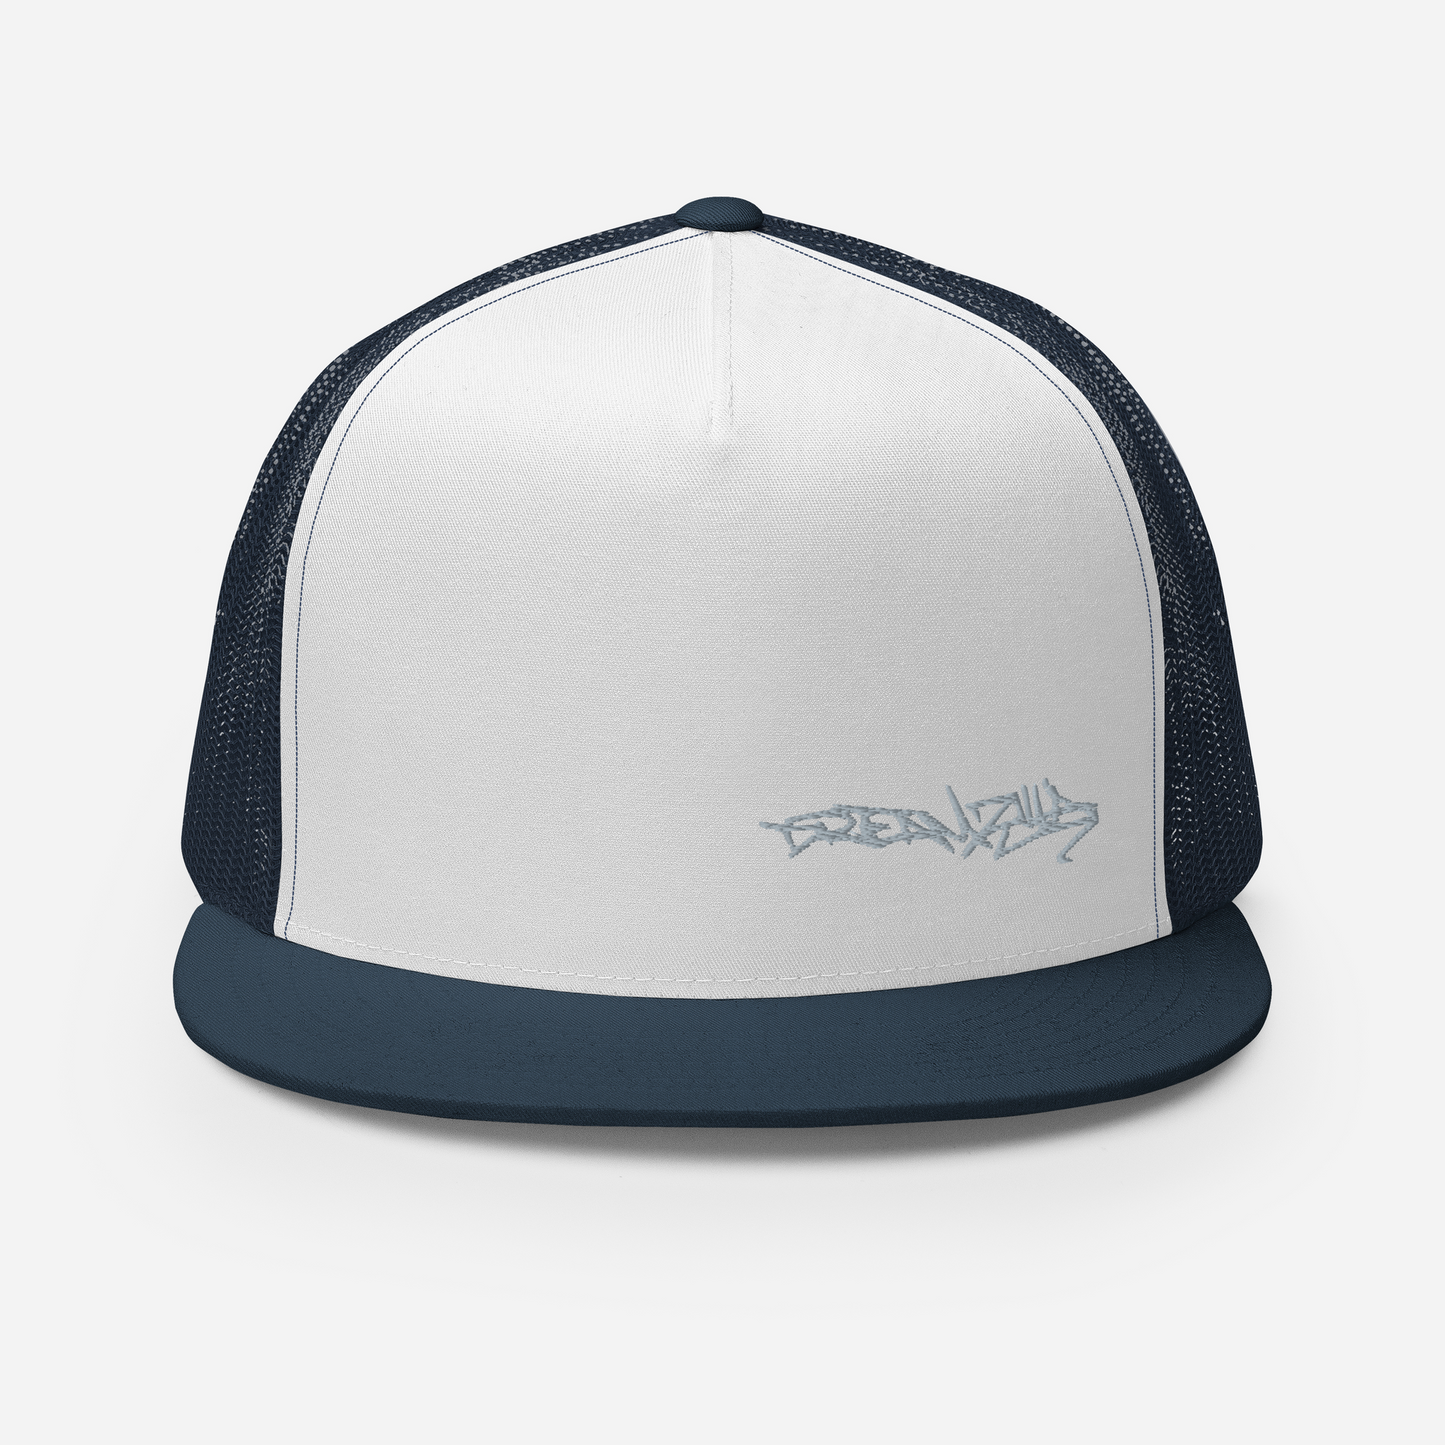 Graffiti Tag Trucker Cap in White with Navy Brim and Back